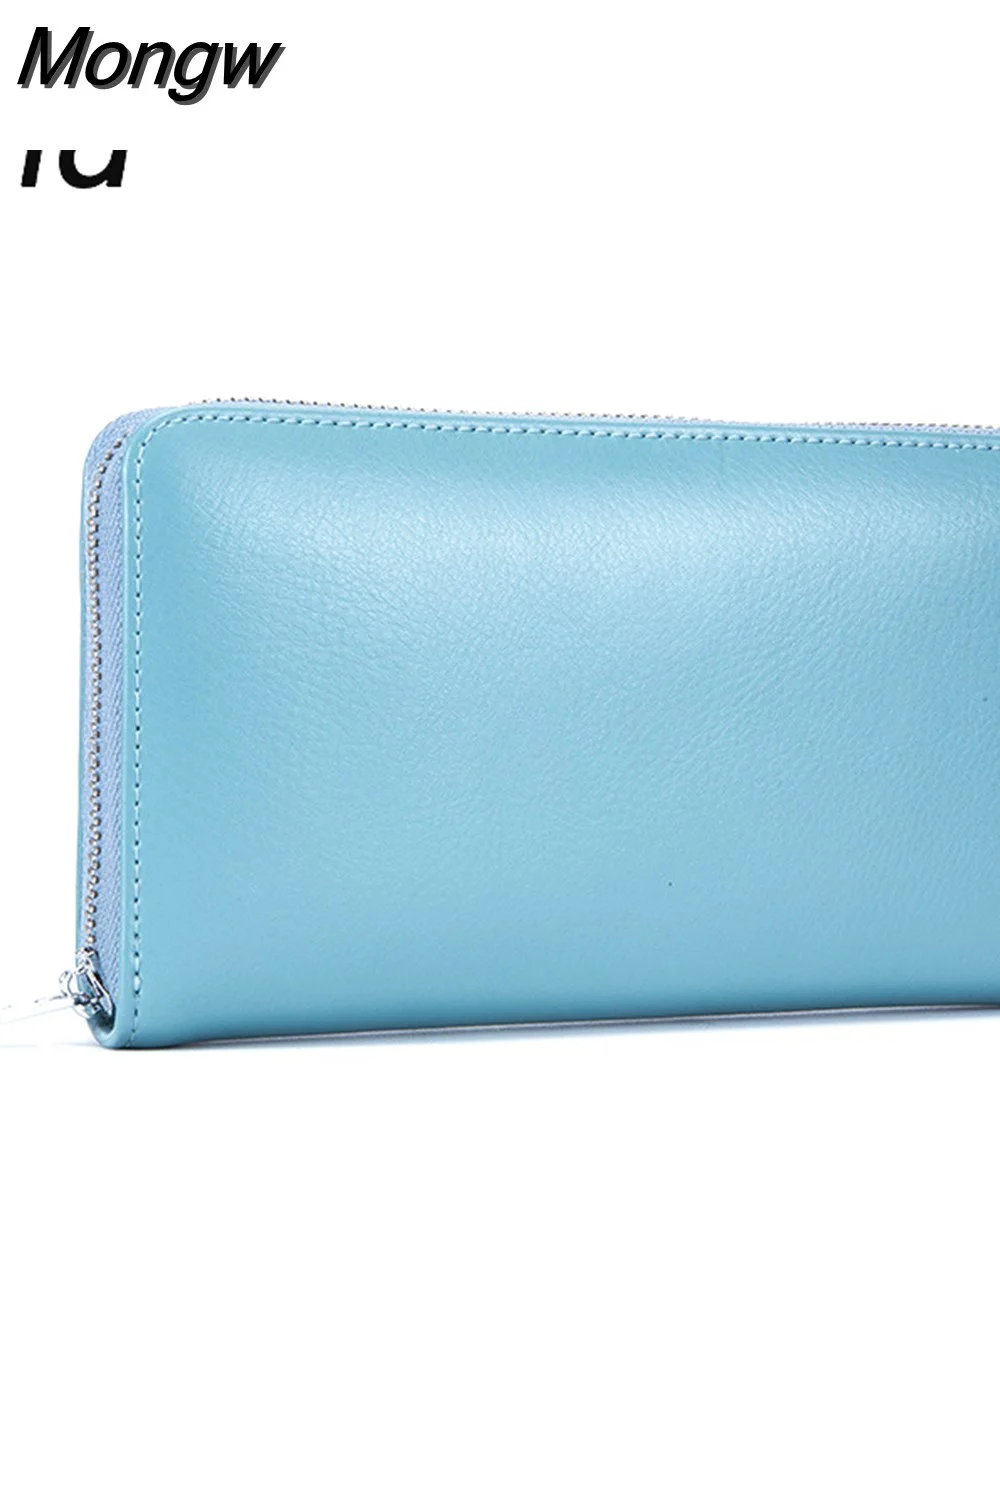 Mongw 36 Slots Genuine Leather Women Wallet Many Departments Female Wallet Clutch High Quality Card Holder Ladies Purse Carteira